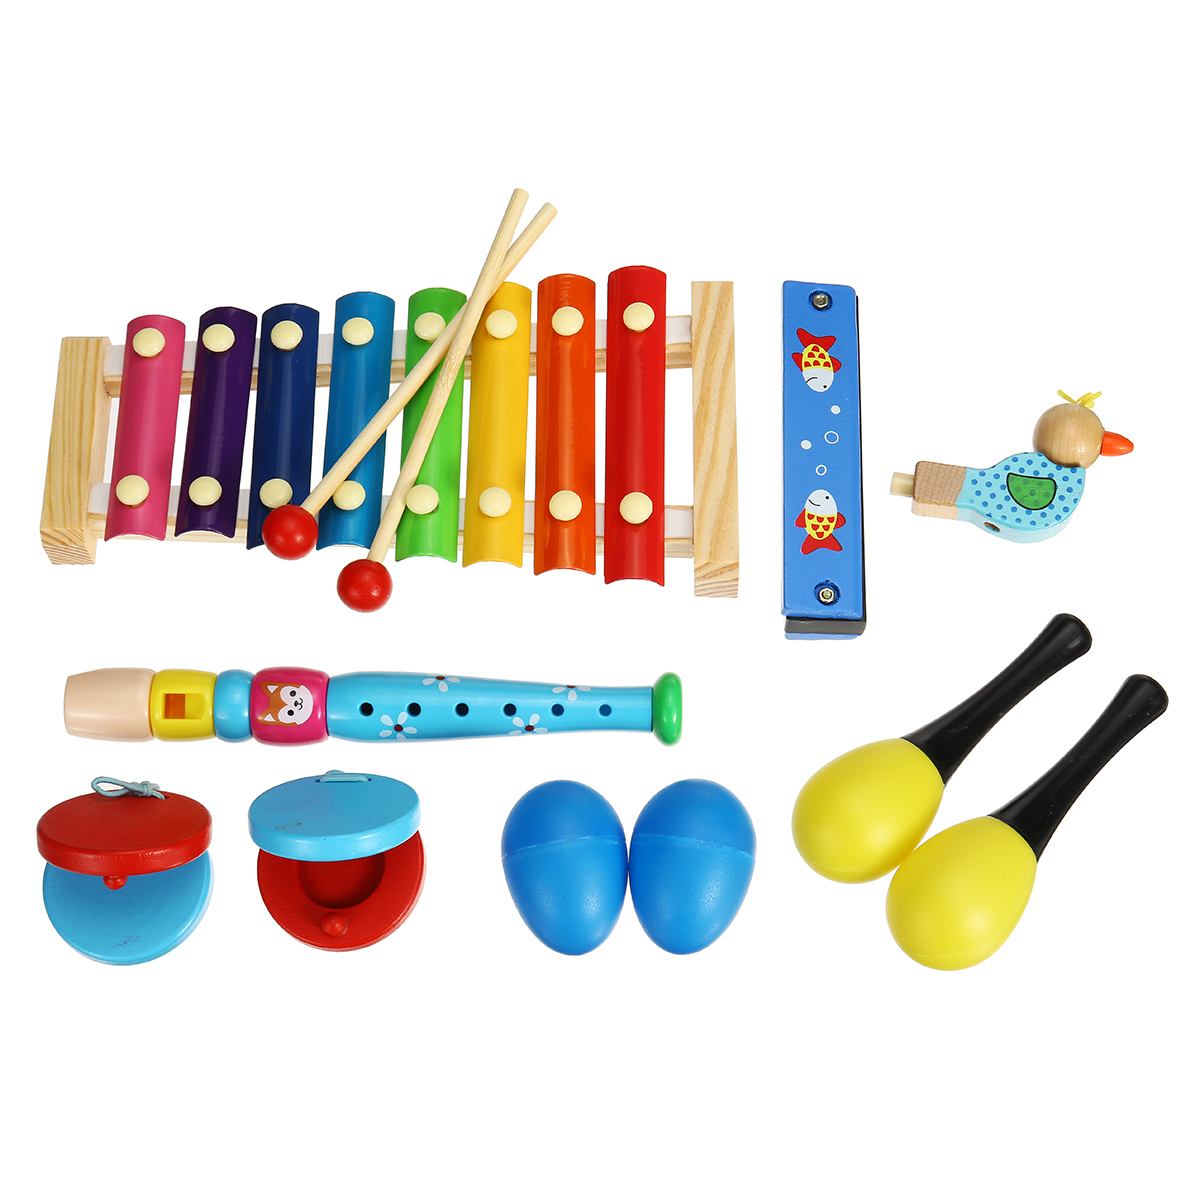 

7 Pieces Orff Musical Instruments Set Kids Puzzle Percussion for Children's Sensing Practice